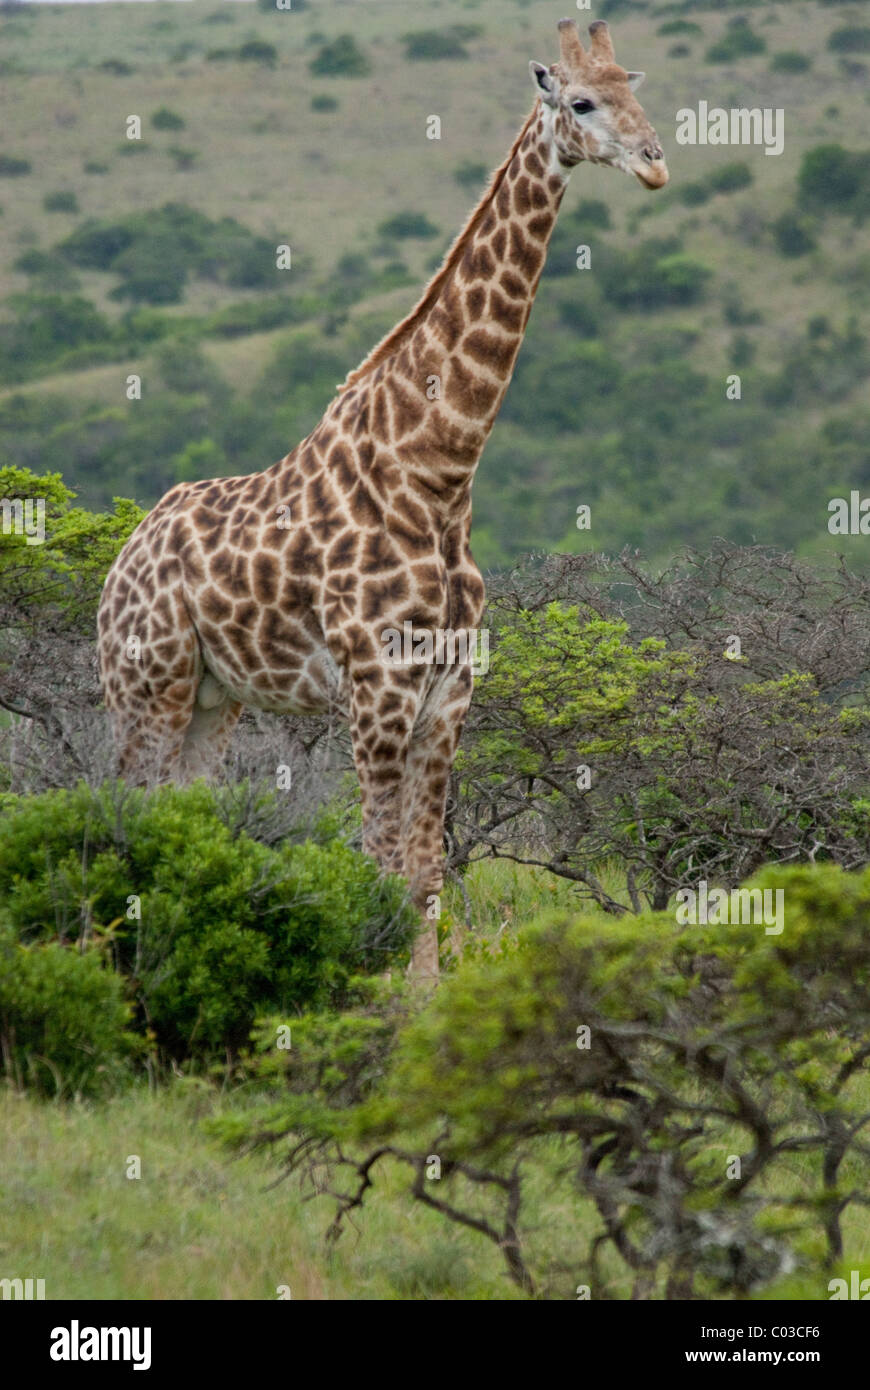 South Africa, Eastern Cape, East London, Inkwenkwezi Private Game Reserve. Stock Photo